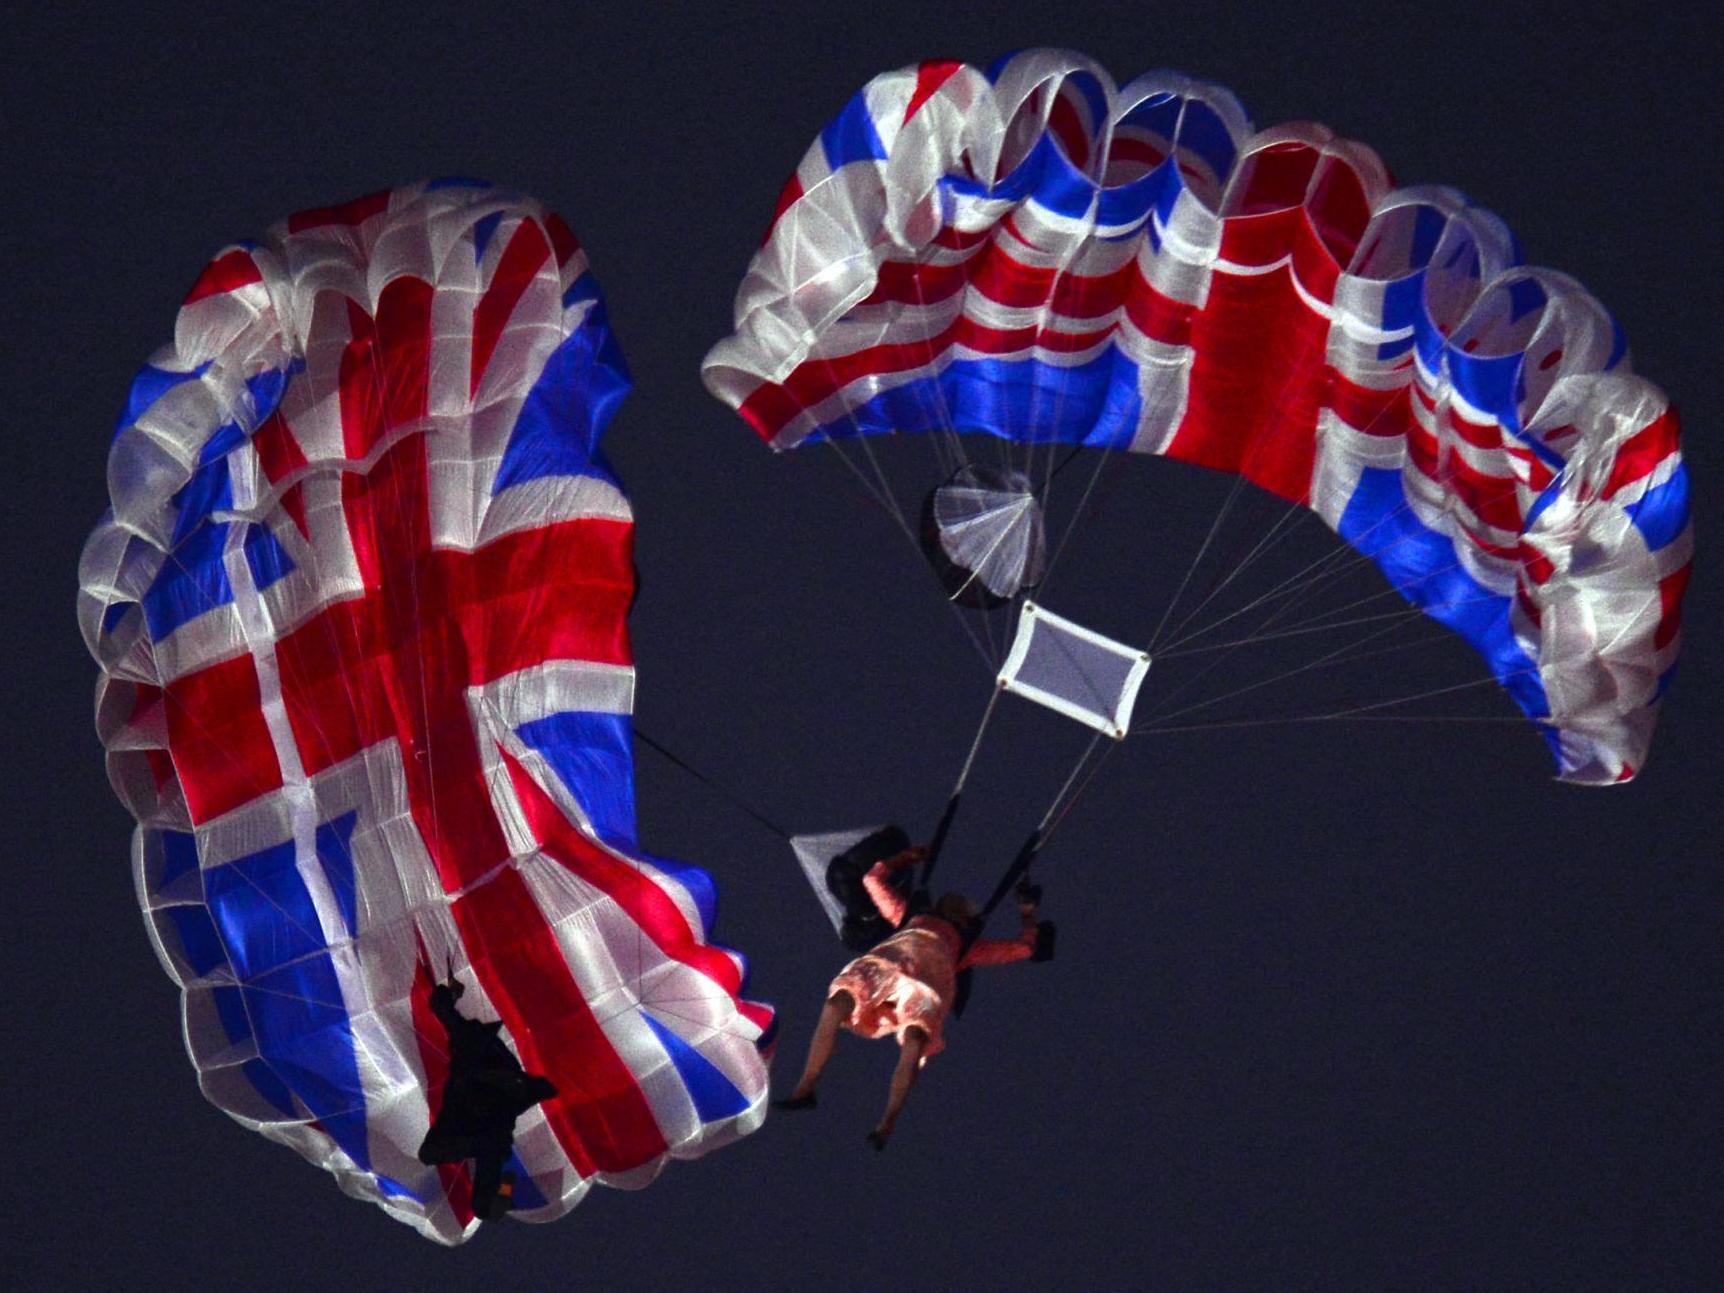 The Queen and James Bond parachute into the Olympic stadium. No, really...